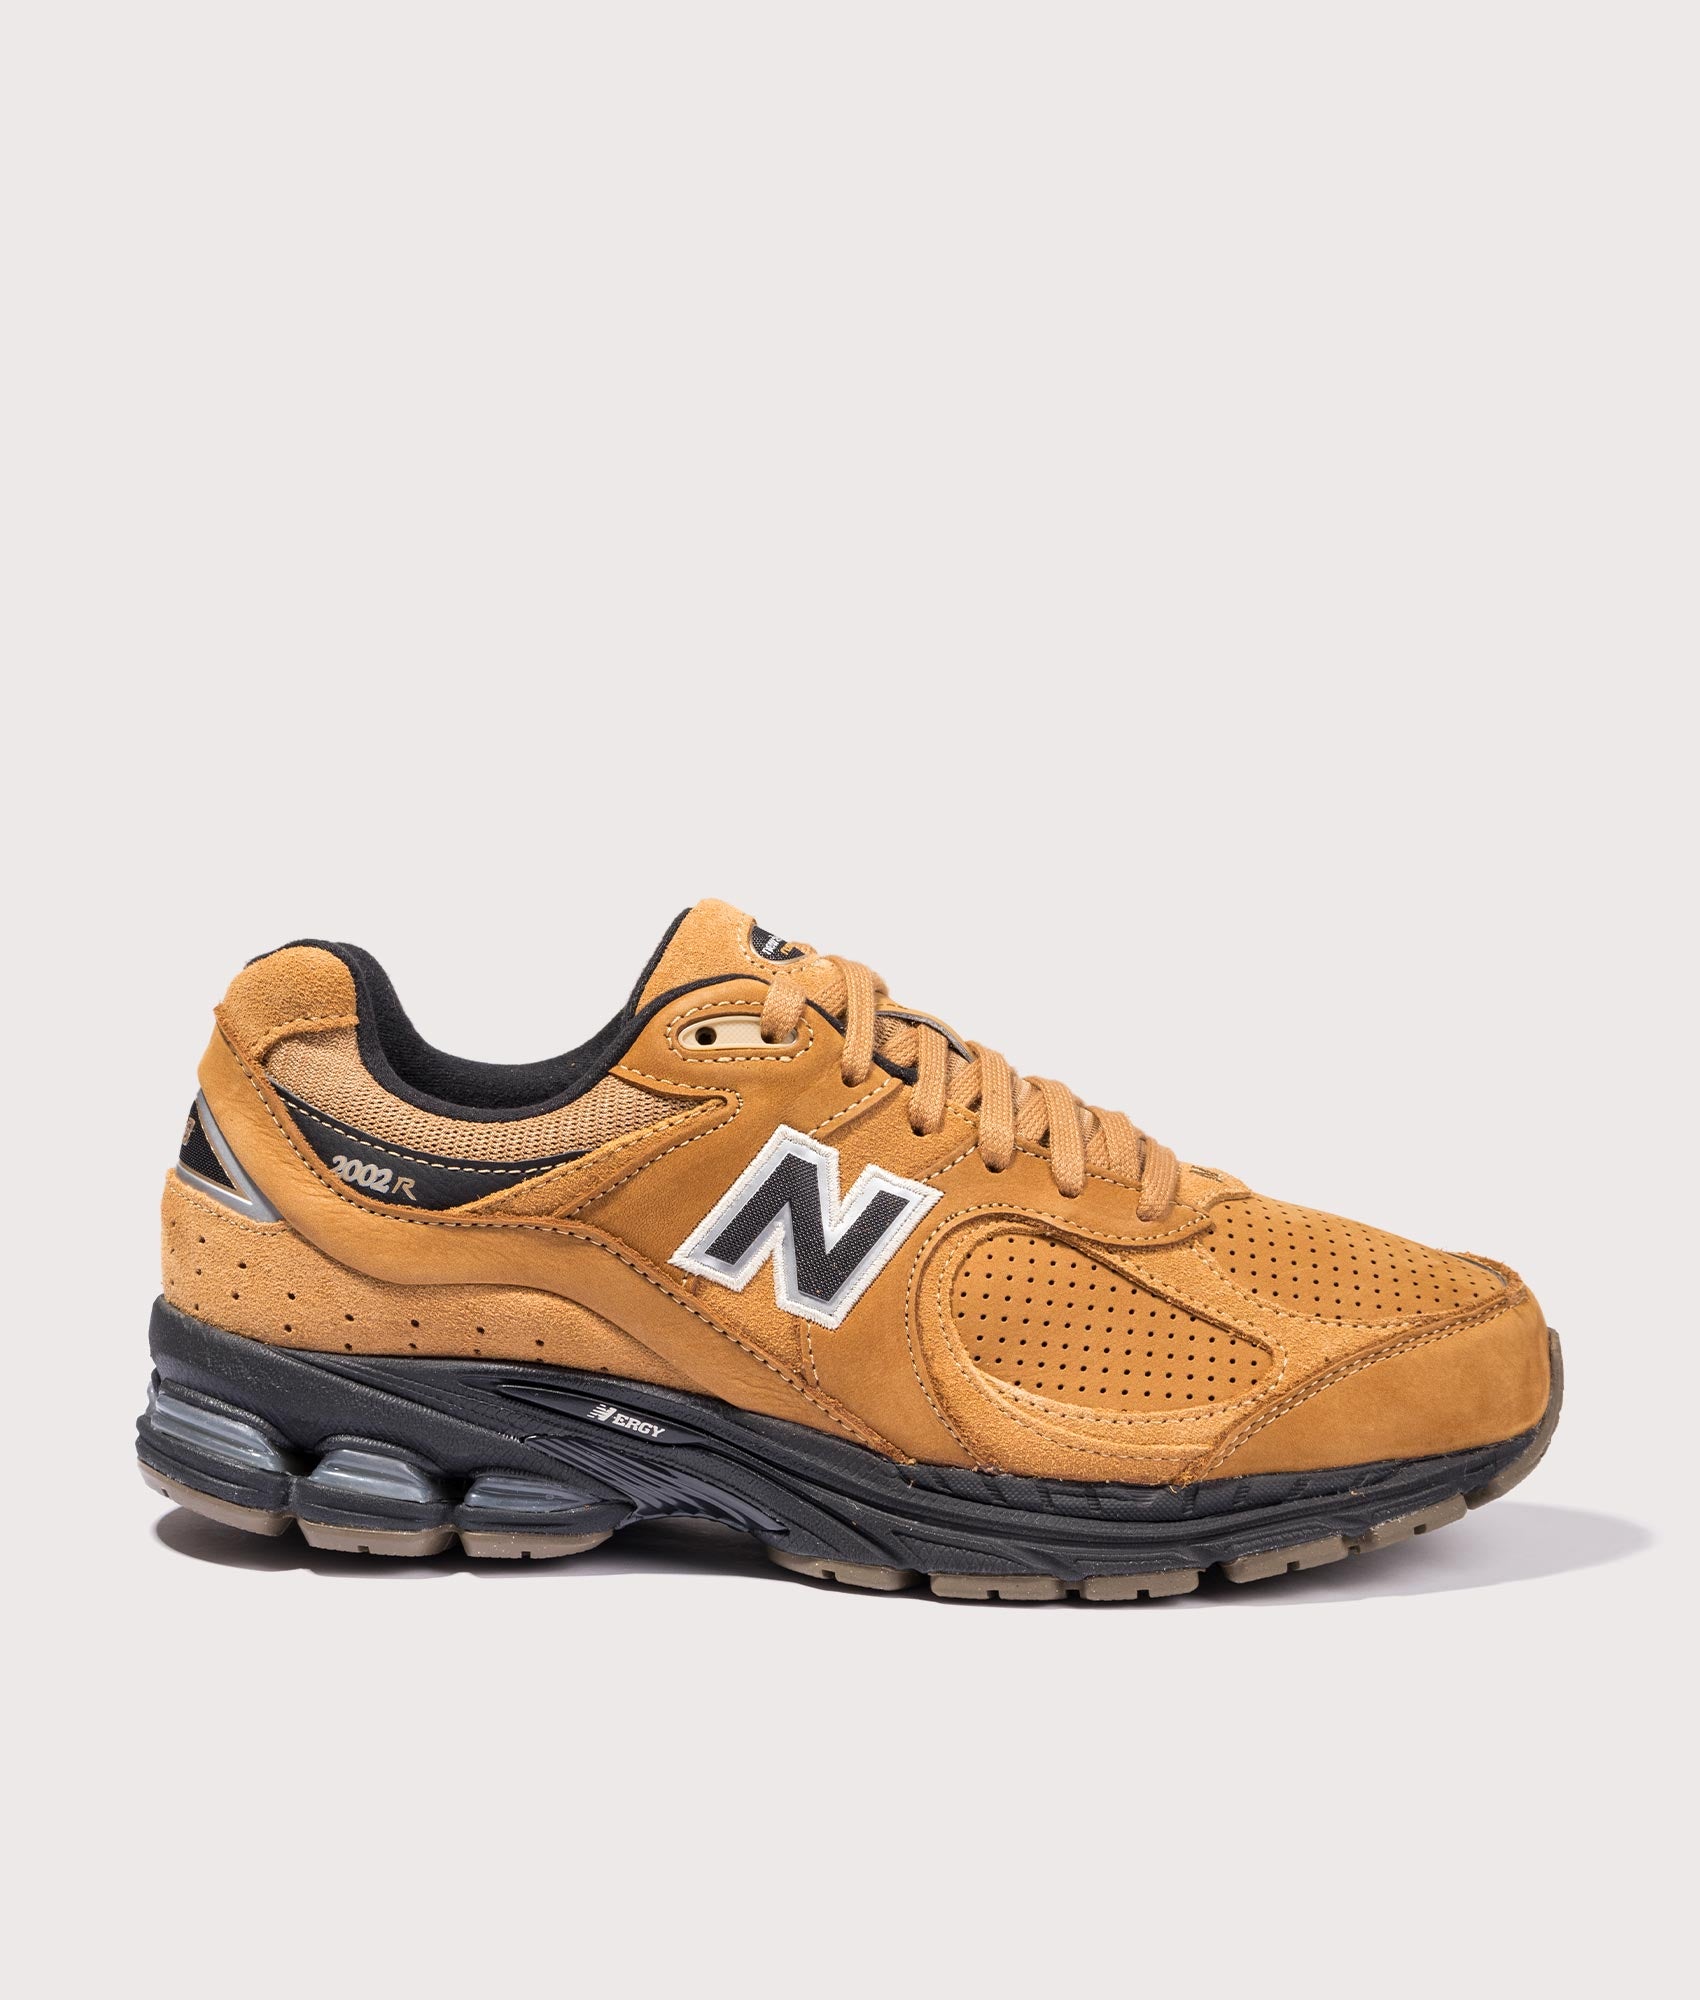 New Balance Mens 2002R Sneakers - Colour: M2002REI Tobacco - Size: 11